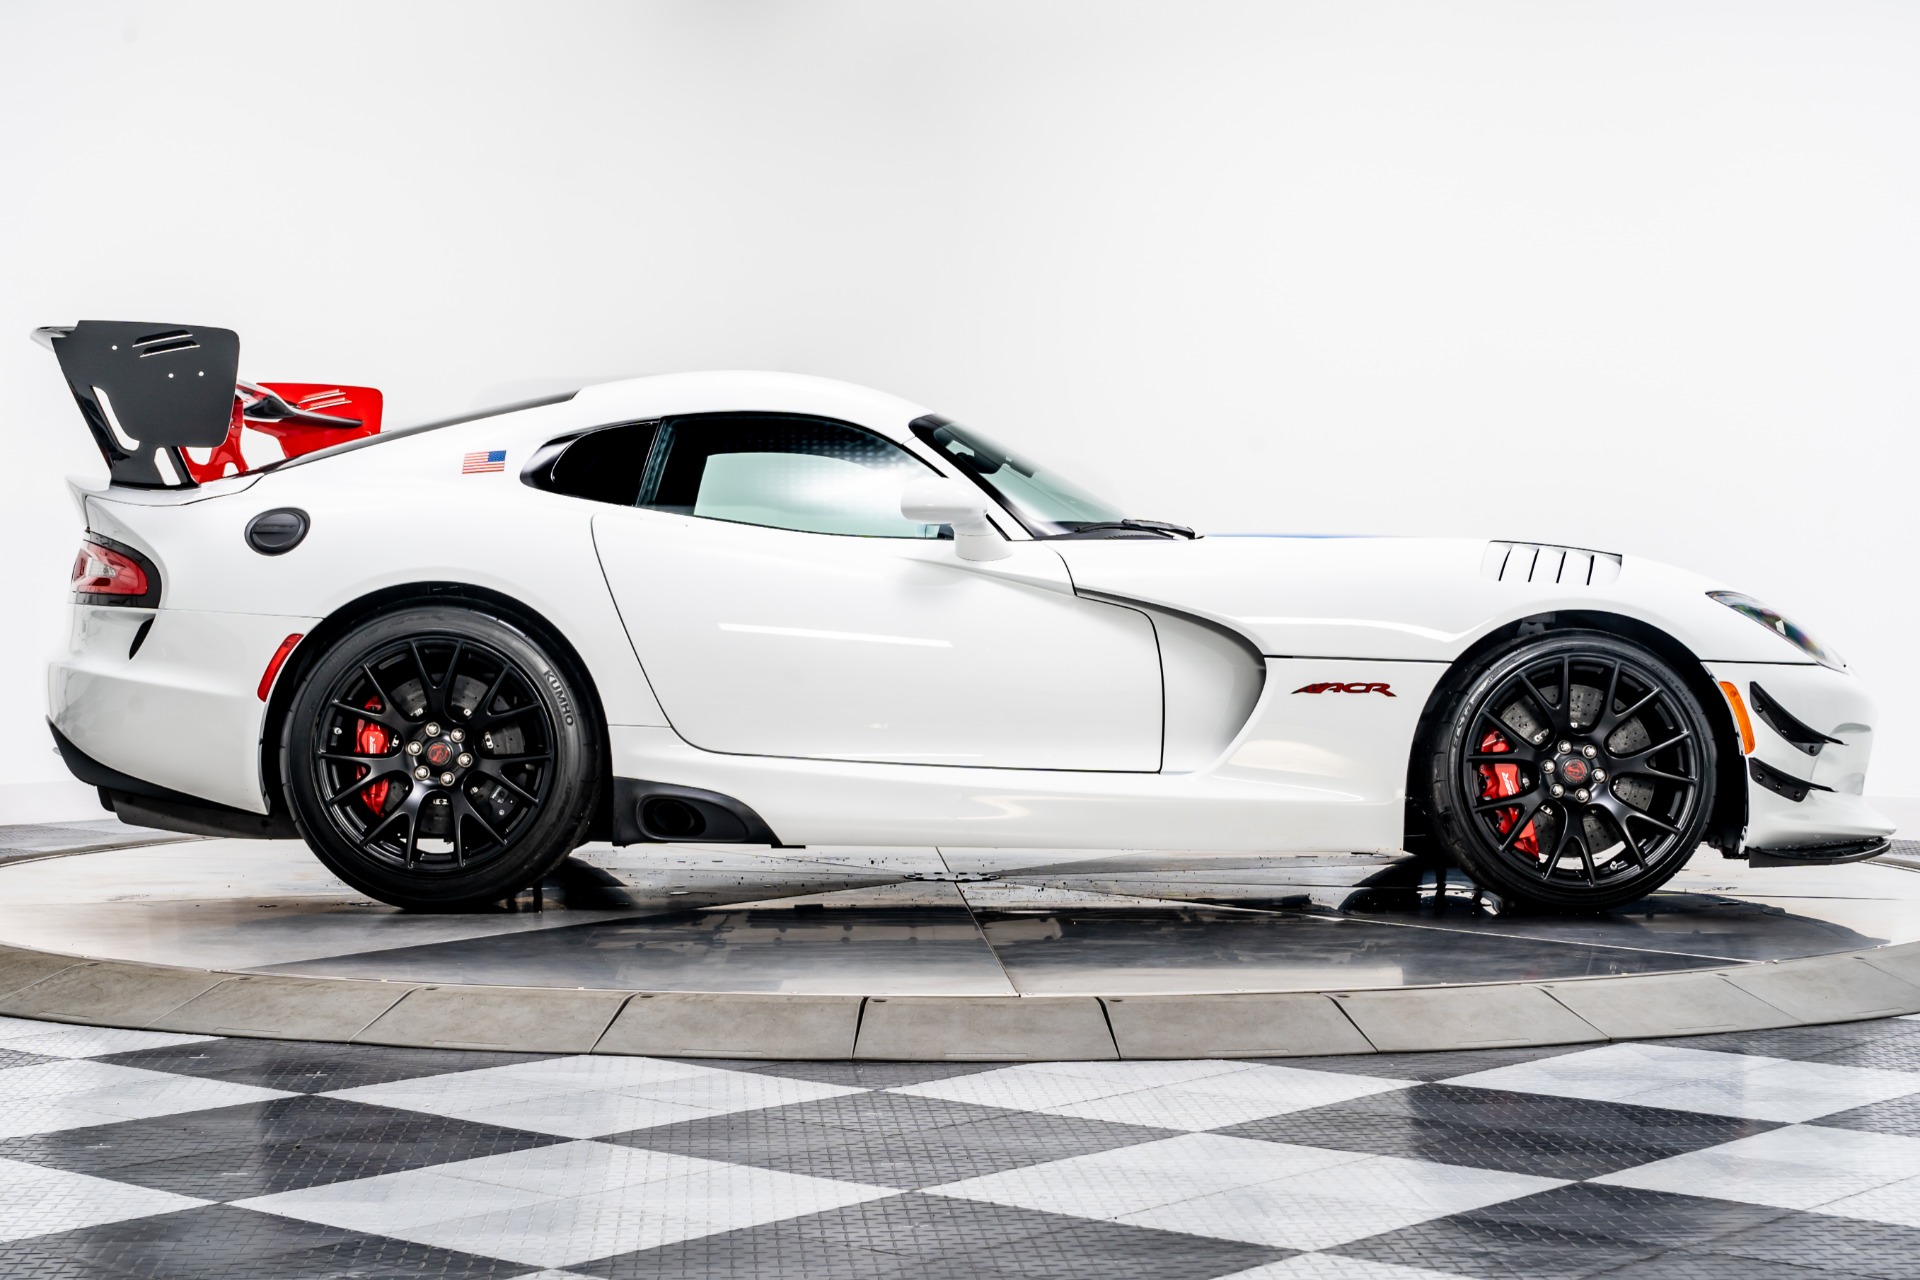 Used 17 Dodge Viper Acr Extreme Aero For Sale Sold Marshall Goldman Cleveland Stock W